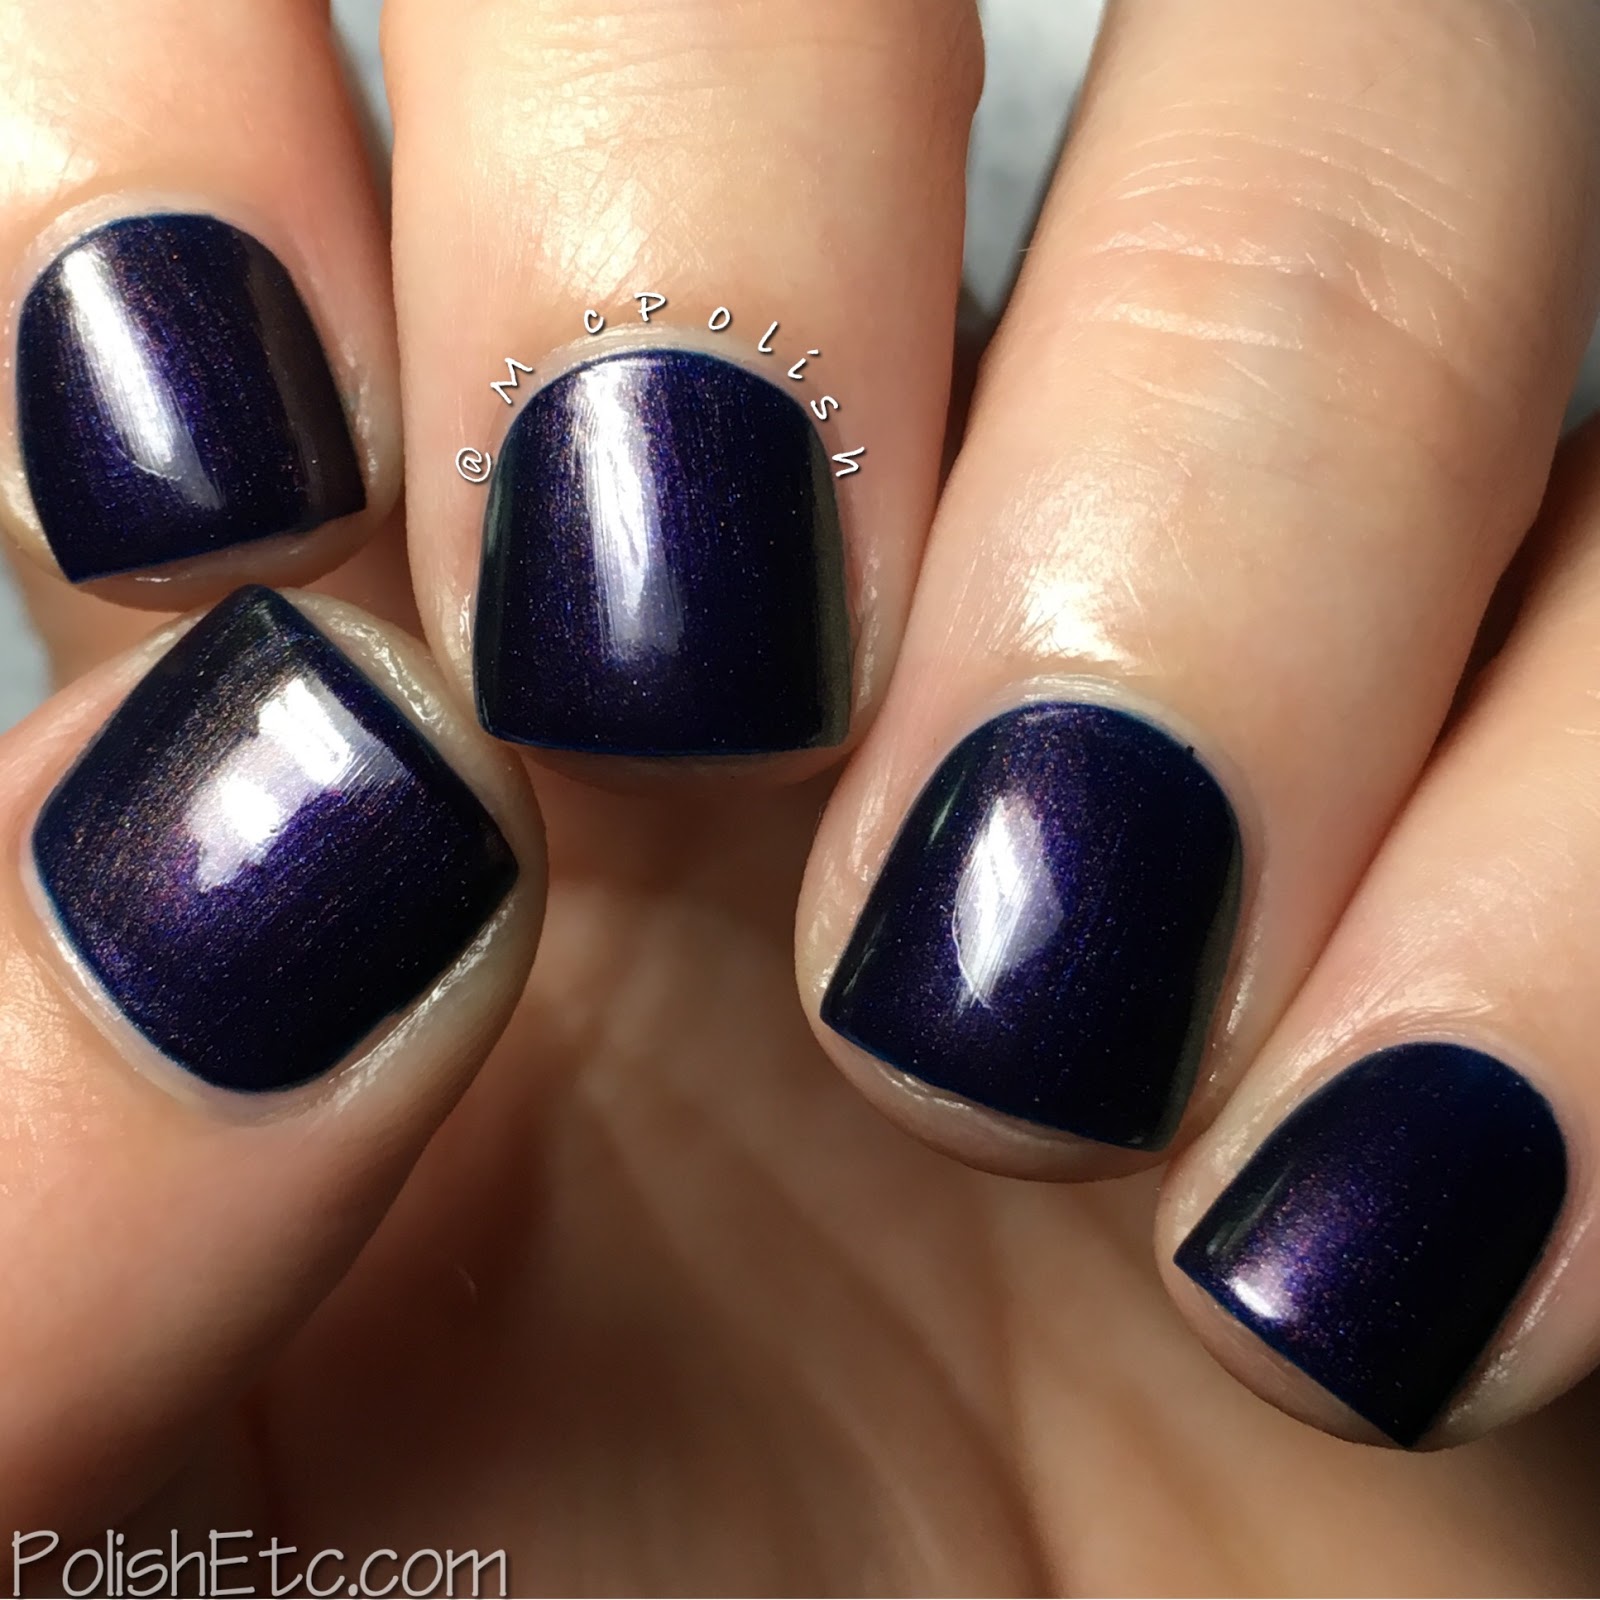 Great Lakes Lacquer - Polishing Poetic Collection - McPolish - The Dying of the Light